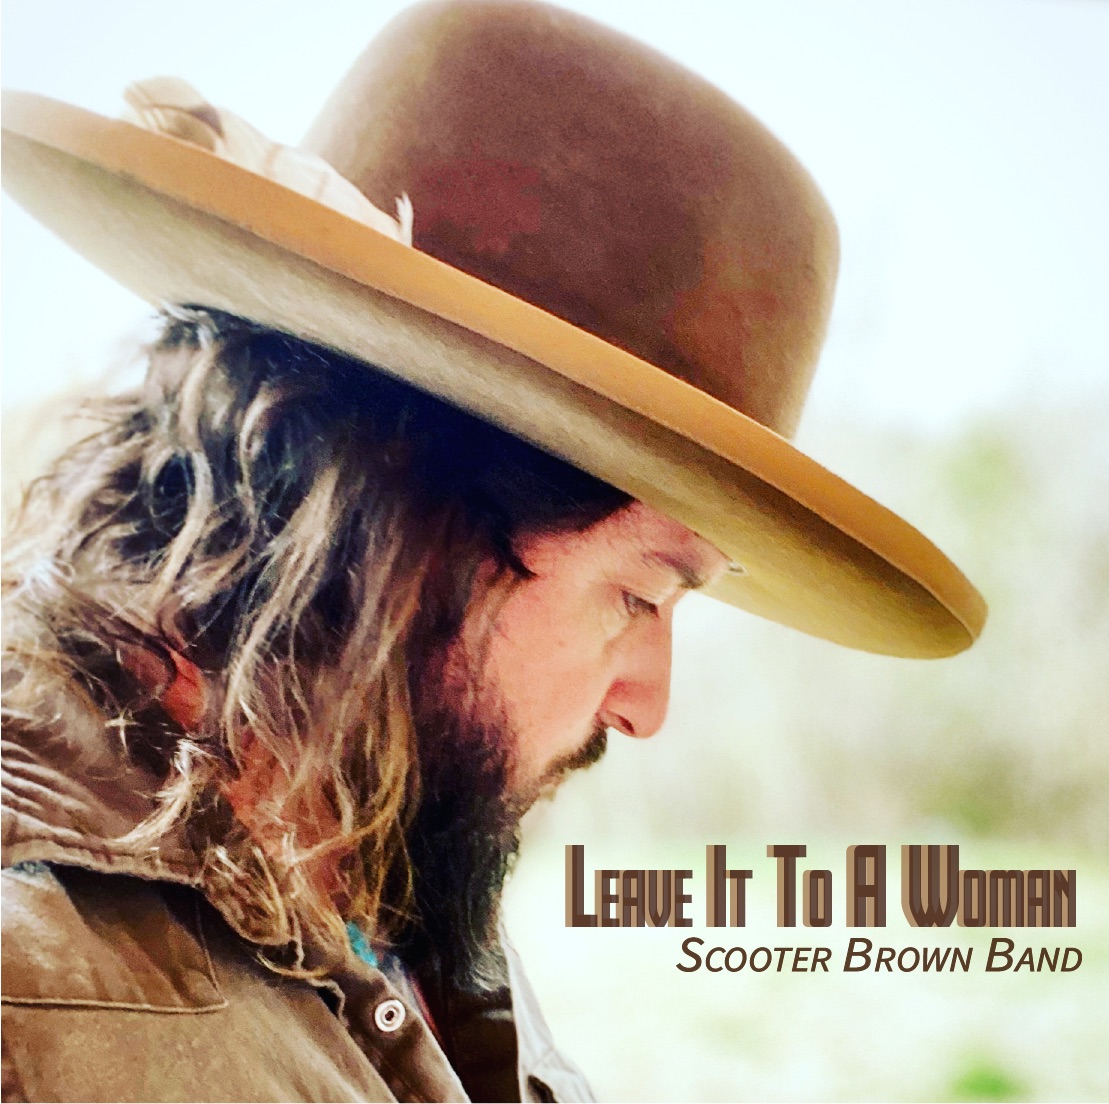 News Scooter Brown Band Releases New Single Leave It To A Woman